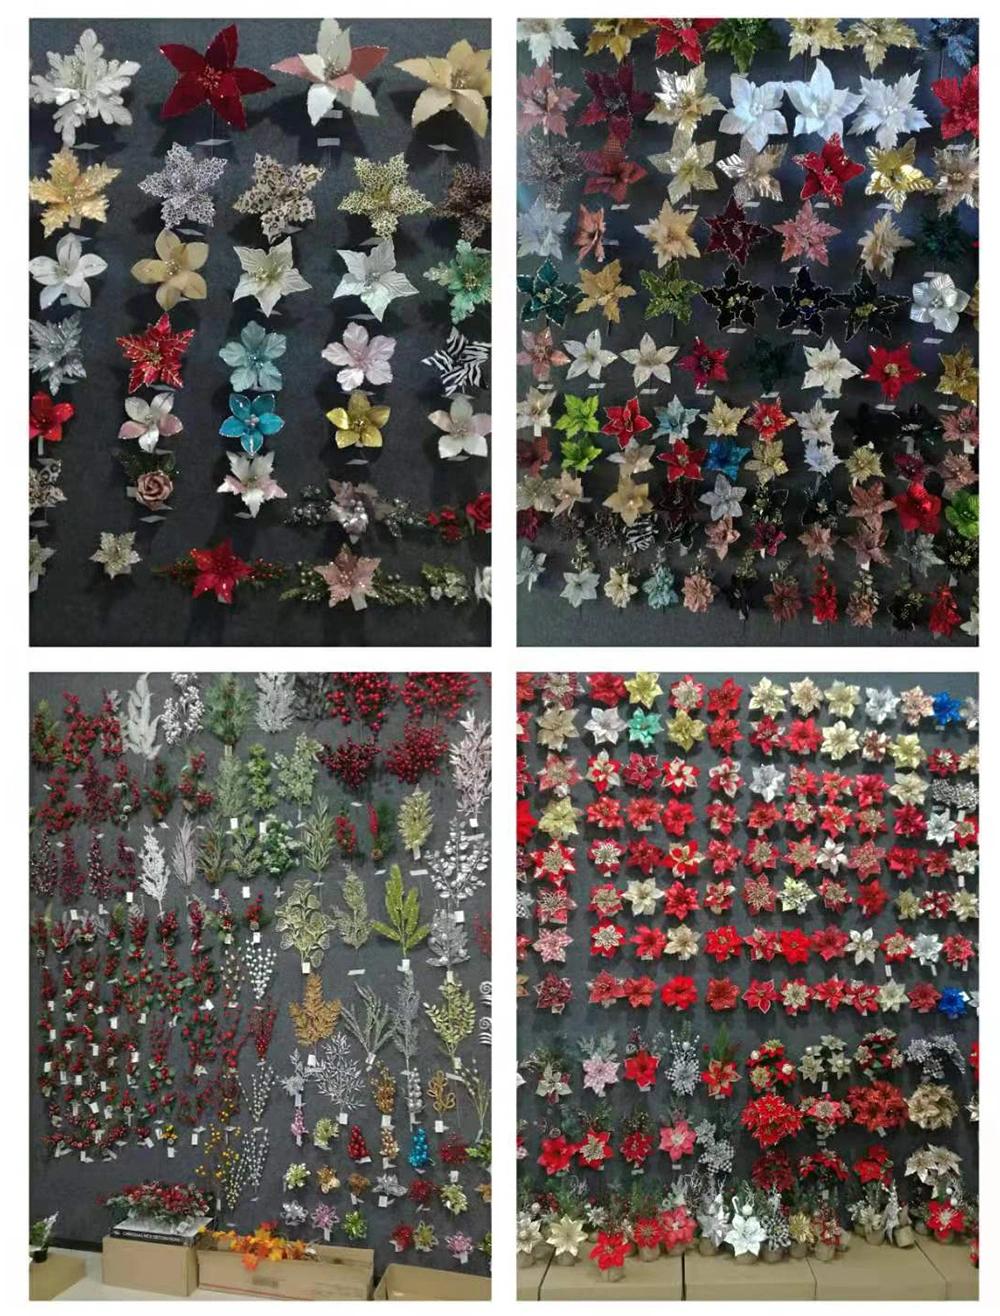 Christmas Pet Tinsel Artificial Flowers for Holiday Wedding Party Decoration Supplies Hook Ornament Craft Gifts